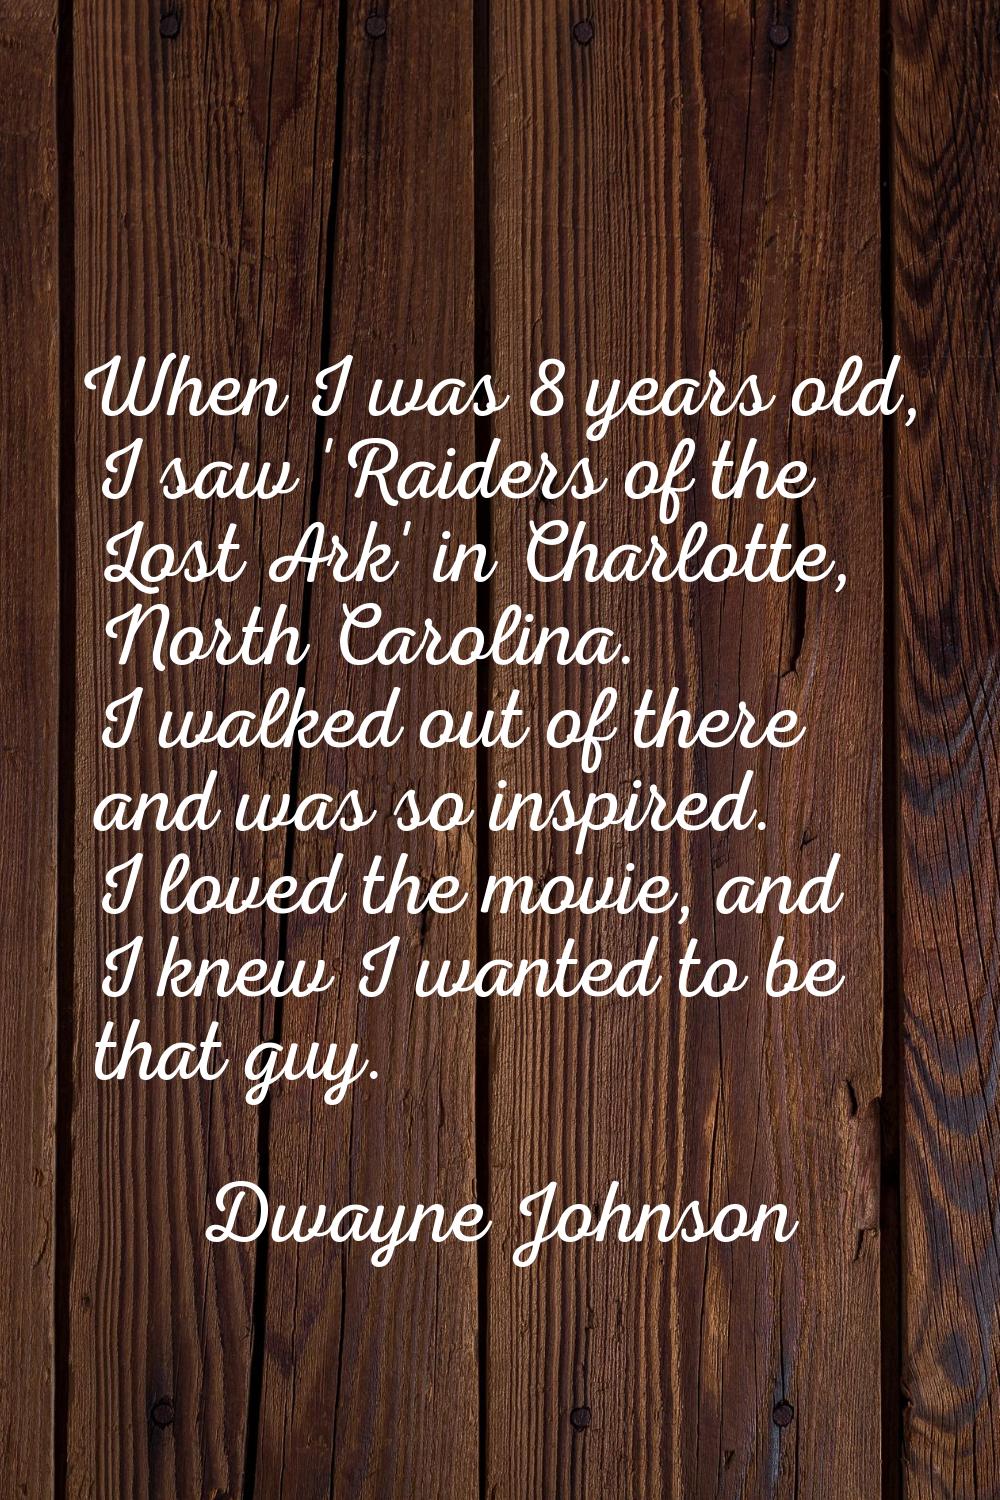 When I was 8 years old, I saw 'Raiders of the Lost Ark' in Charlotte, North Carolina. I walked out 